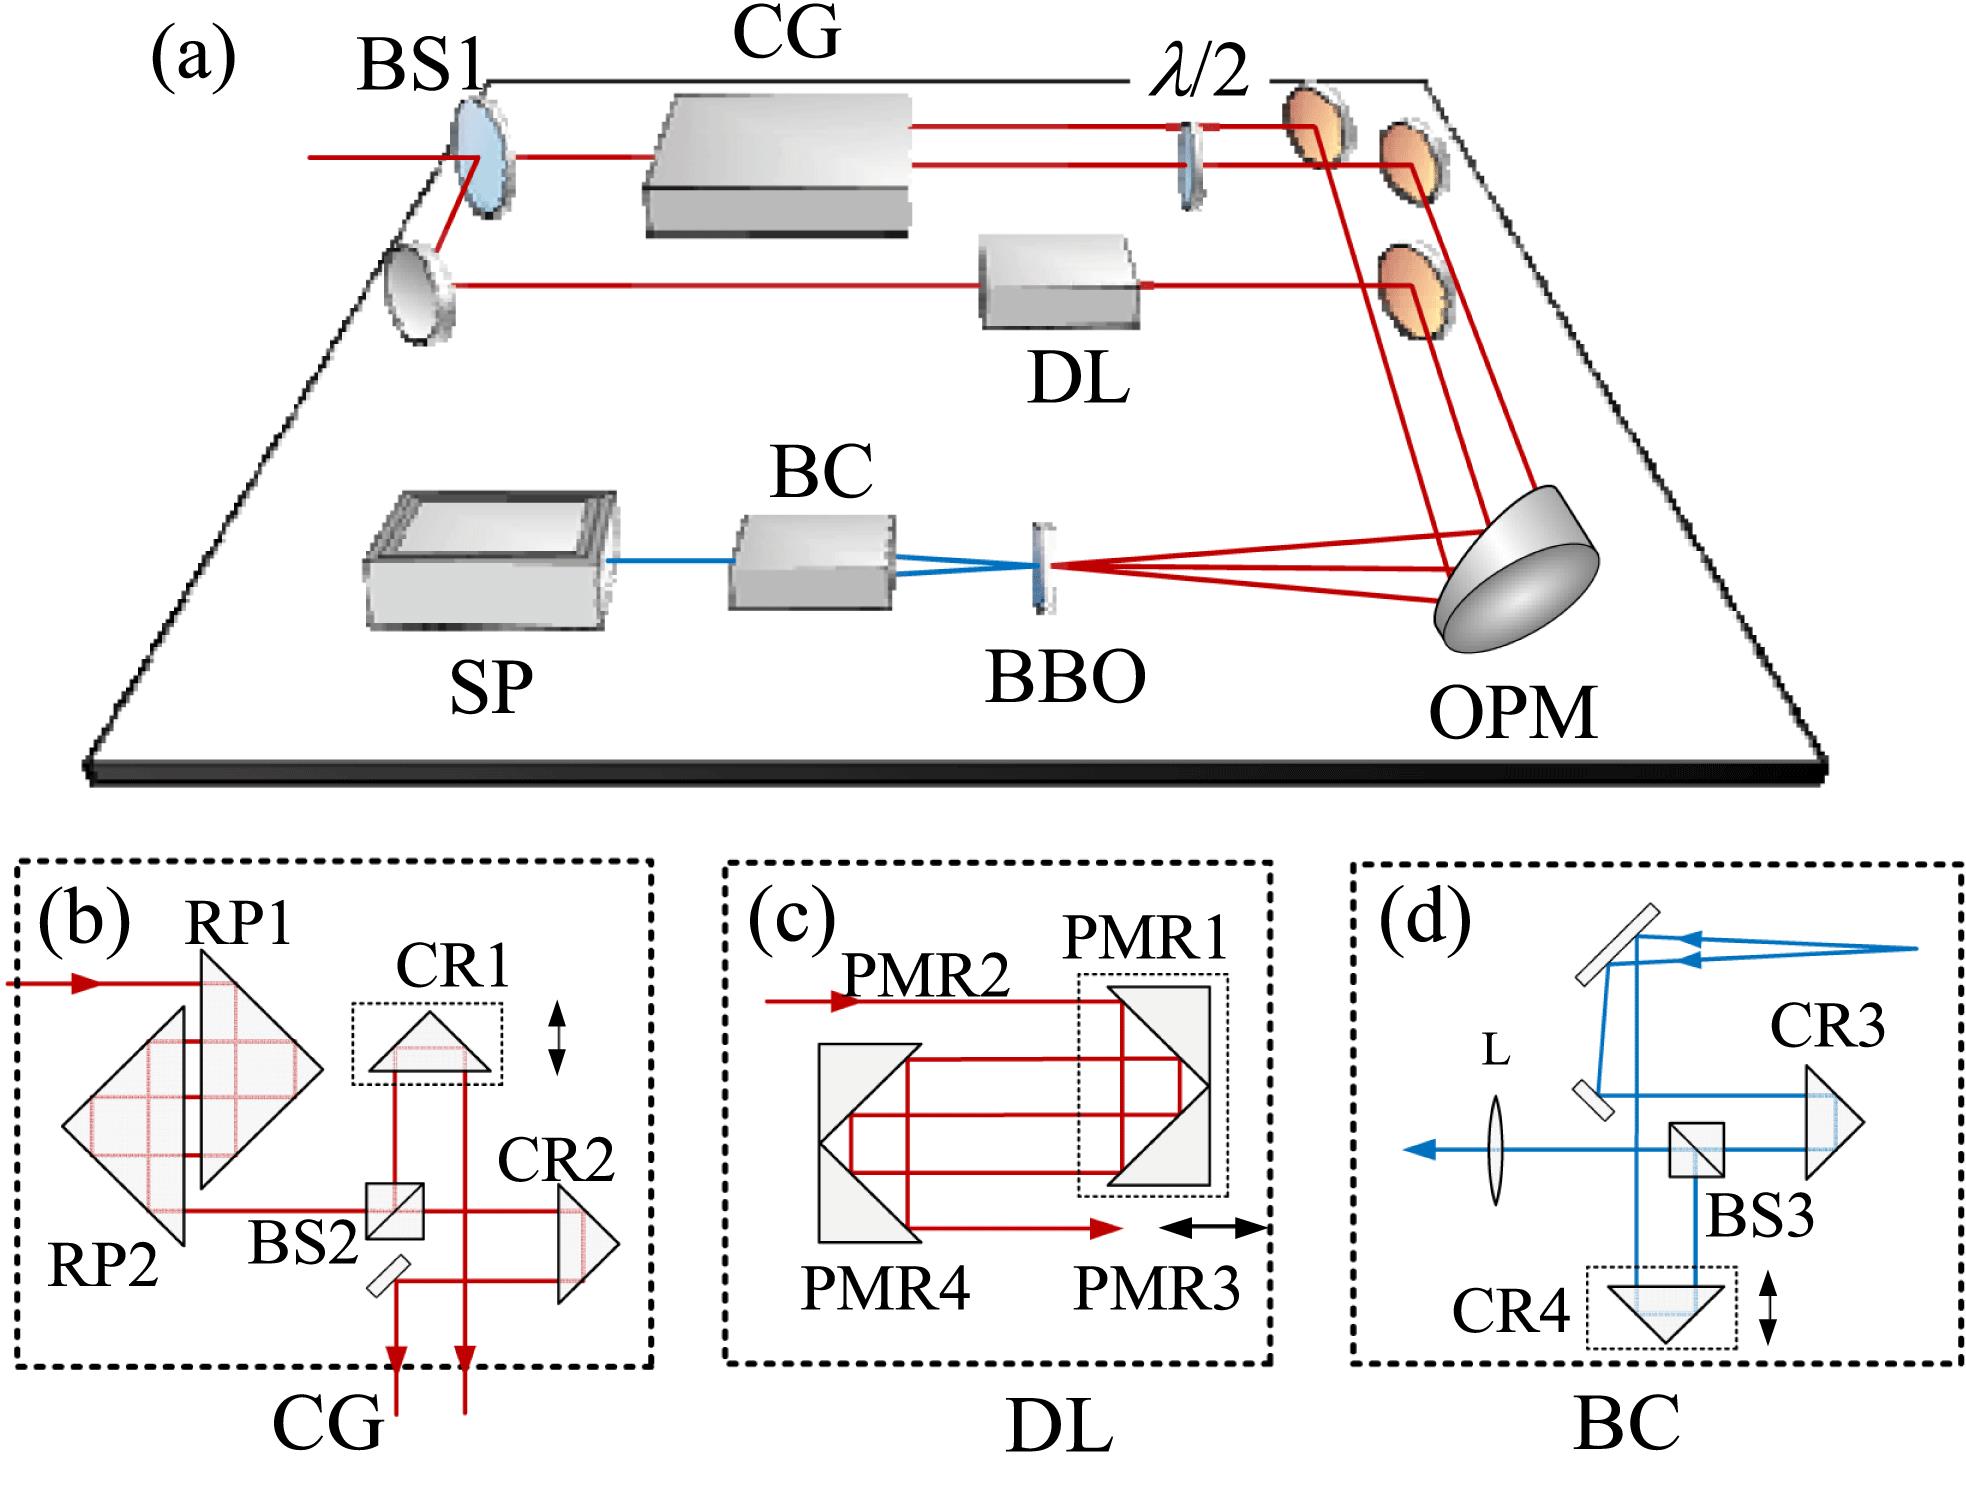 (a) SPIDER setup; (b) prism-based chirped-pulse-replicas generator (CG); (c) prism-based light path delayer (DL); (d) prism-based beam combiner (BC). BS1-BS3: beam splitters, $\unicode[STIX]{x1D706}/2$: half-wave plate, OPM: off-axis parabolic mirror, SP: spectrograph, RP1 and RP2: right-angle prism pair, CR1-CR4: prism-mirrors corner reflectors, PMR1-PMR4: prism-mirrors reflectors, L: lens.